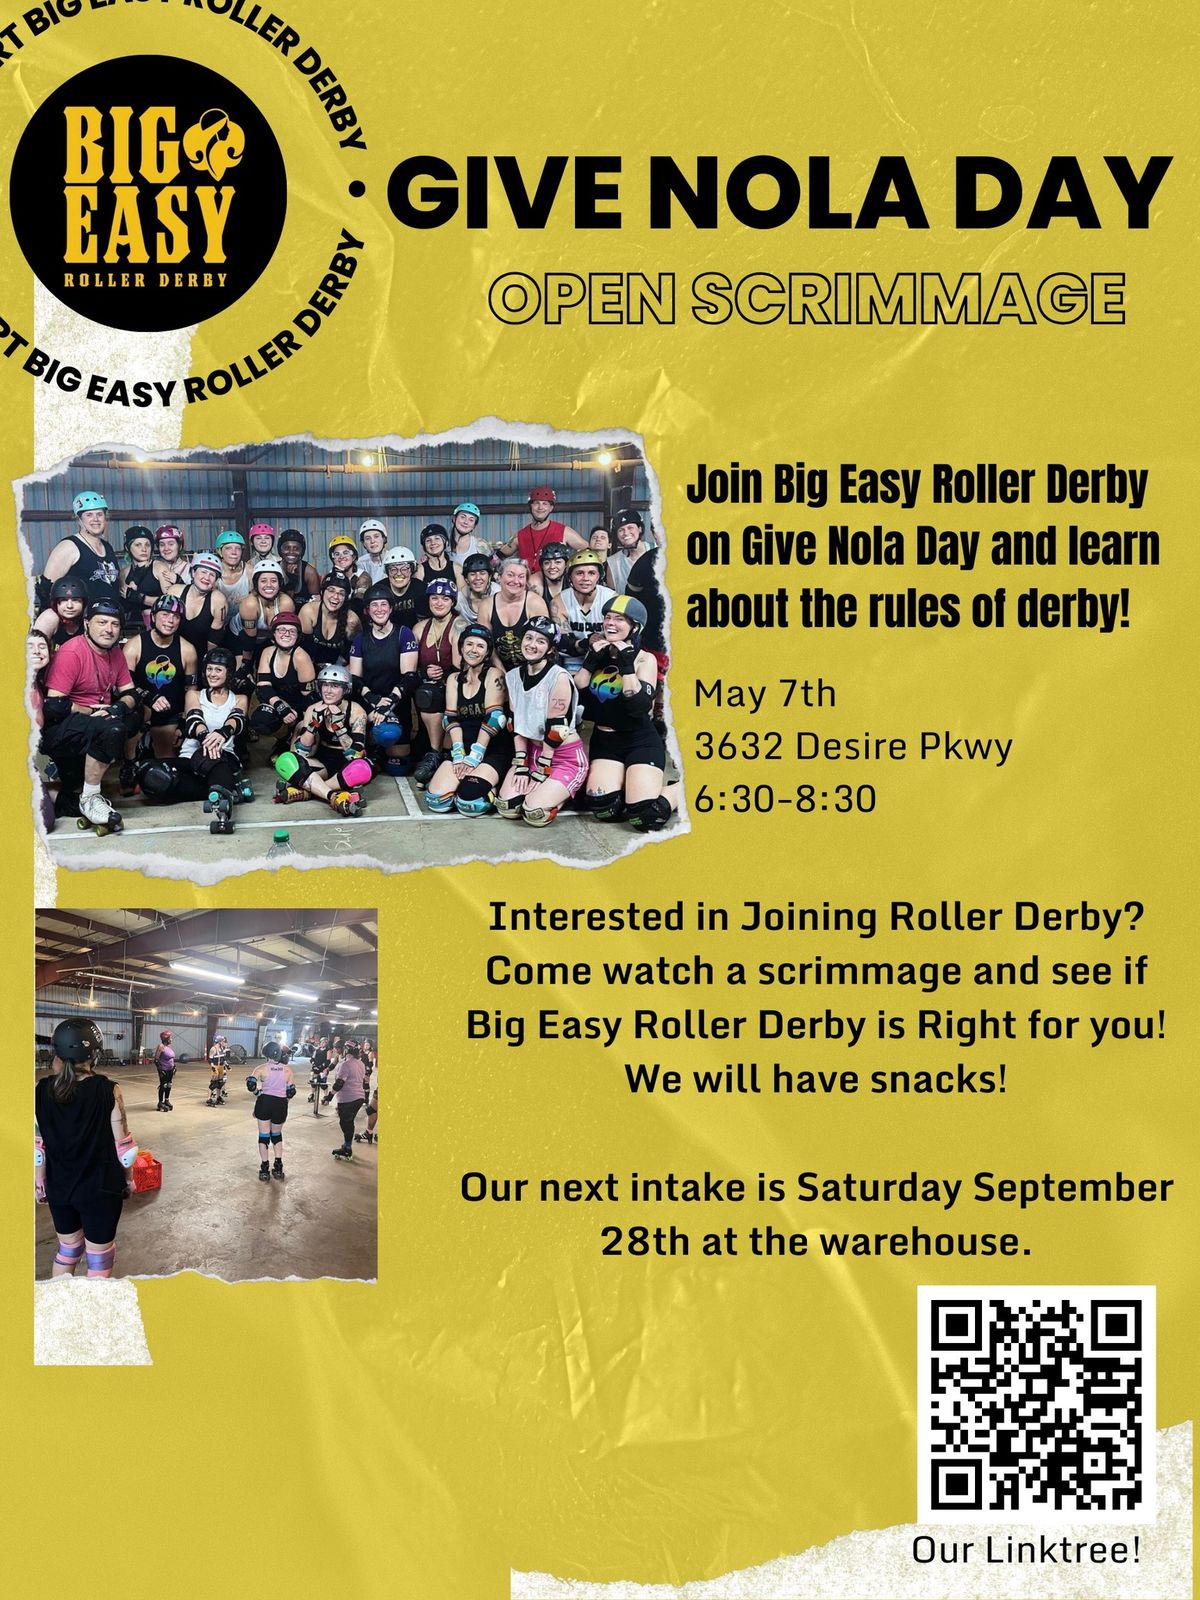 Give Nola Day Open Scrimmage with Big Easy Roller Derby!